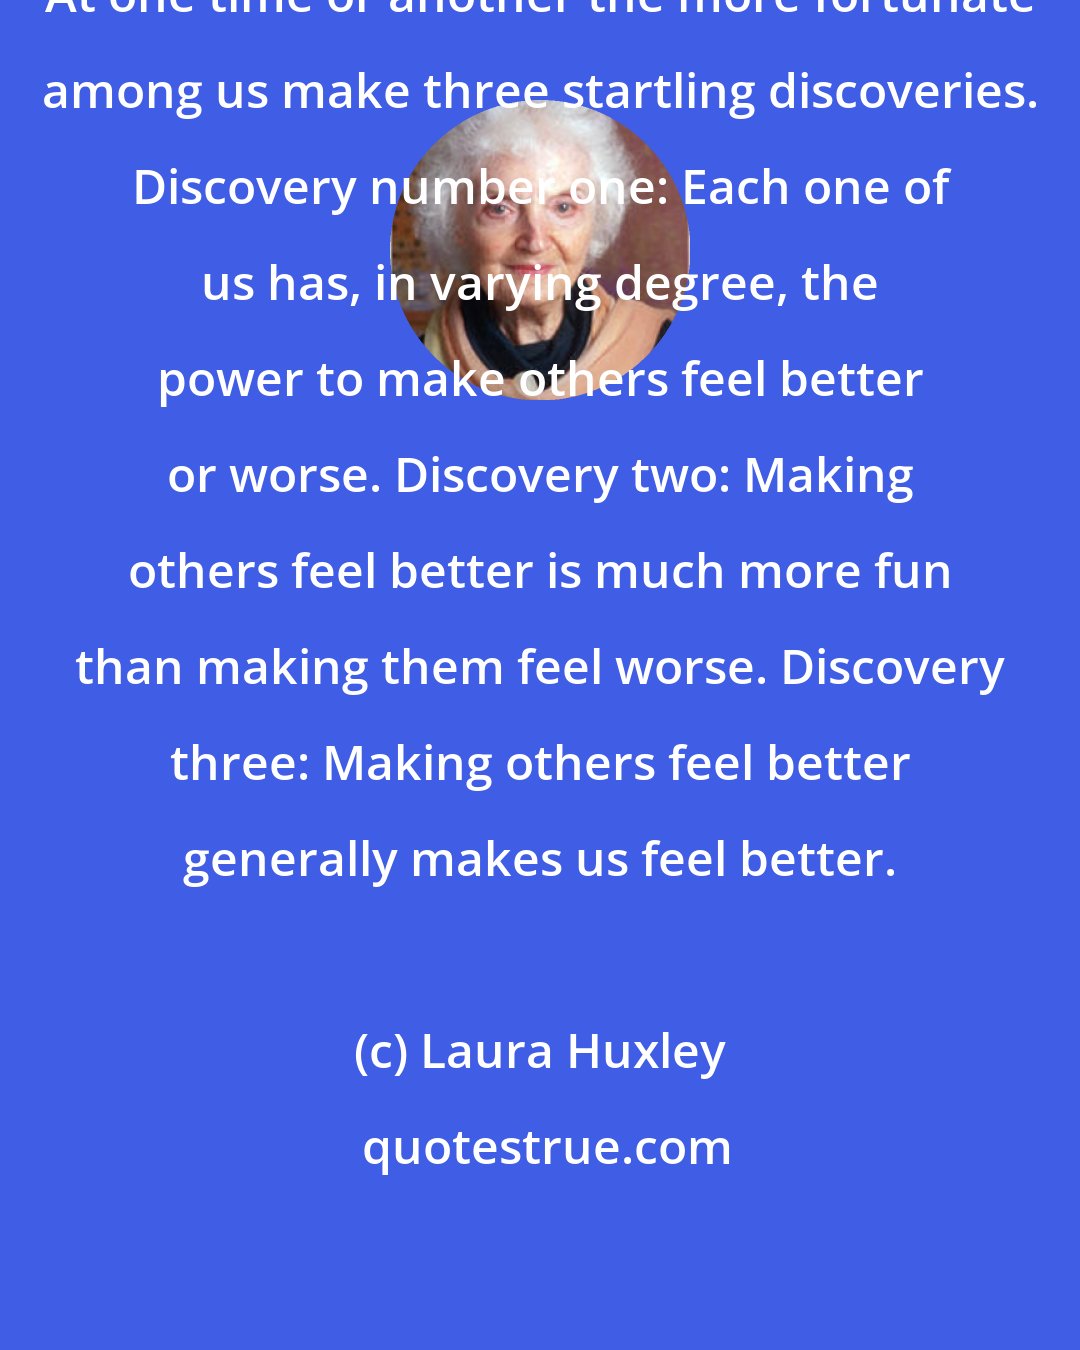 Laura Huxley: At one time or another the more fortunate among us make three startling discoveries. Discovery number one: Each one of us has, in varying degree, the power to make others feel better or worse. Discovery two: Making others feel better is much more fun than making them feel worse. Discovery three: Making others feel better generally makes us feel better.